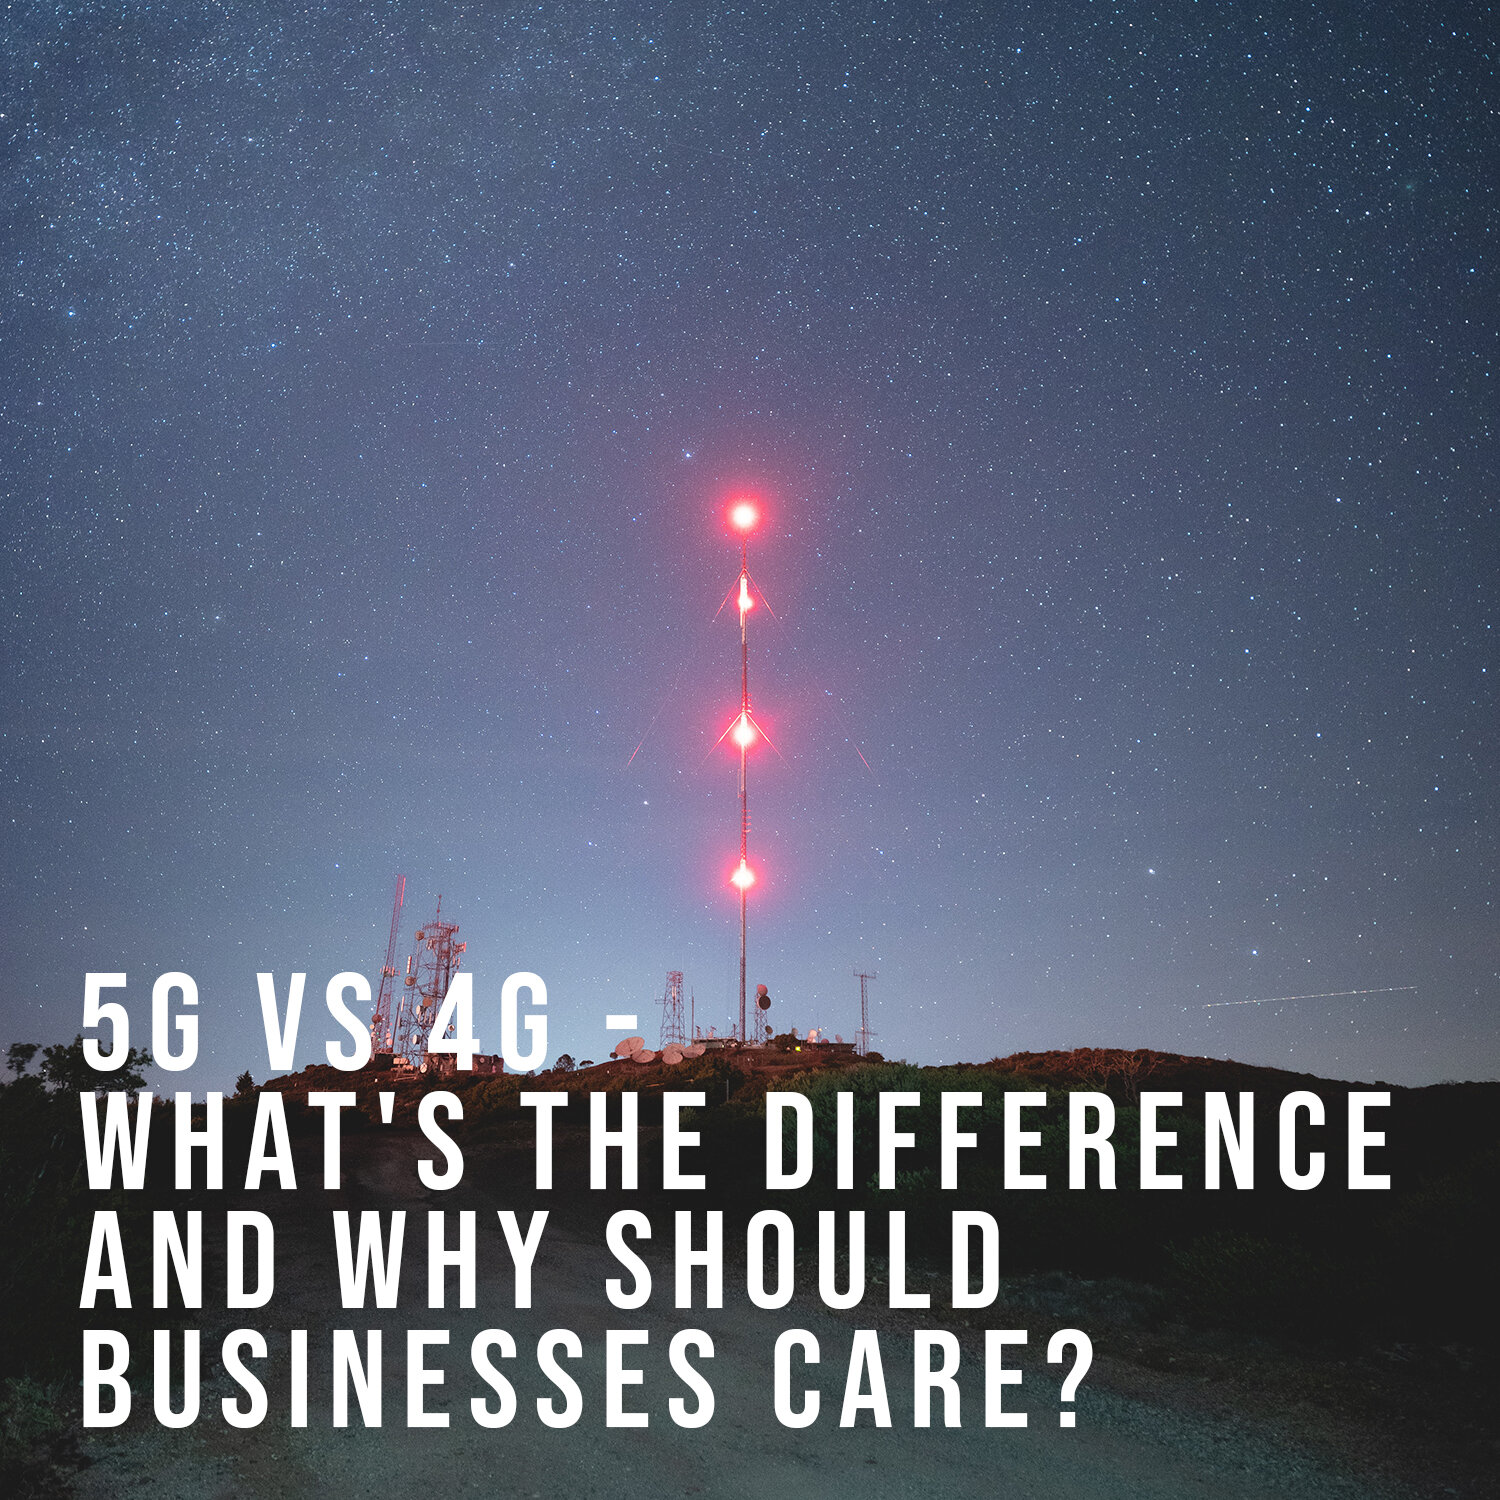 5G vs 4G – What’s the difference and why should businesses care?